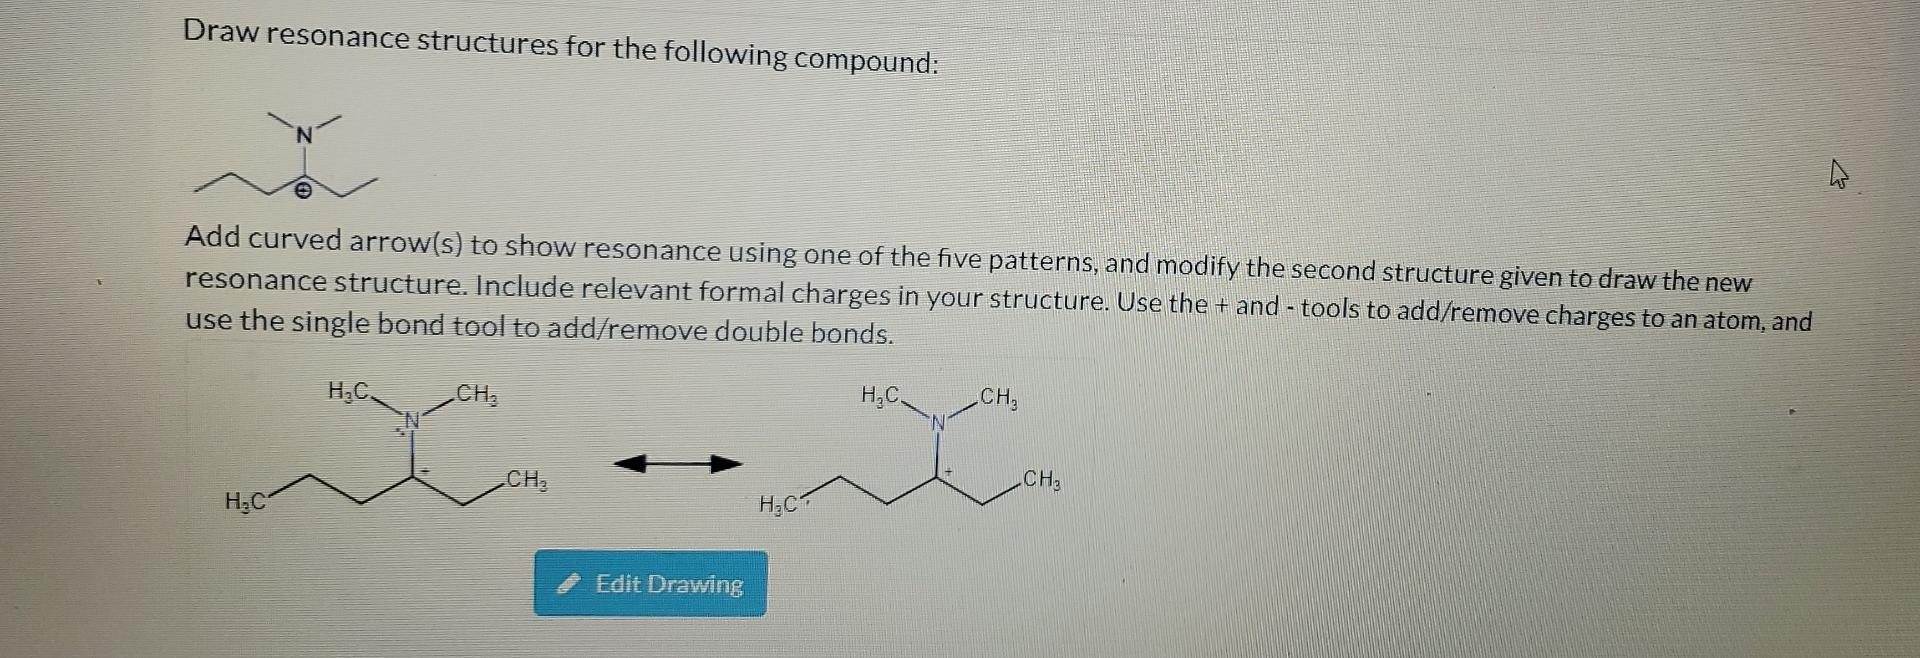 [Solved] Draw resonance structures for the follow